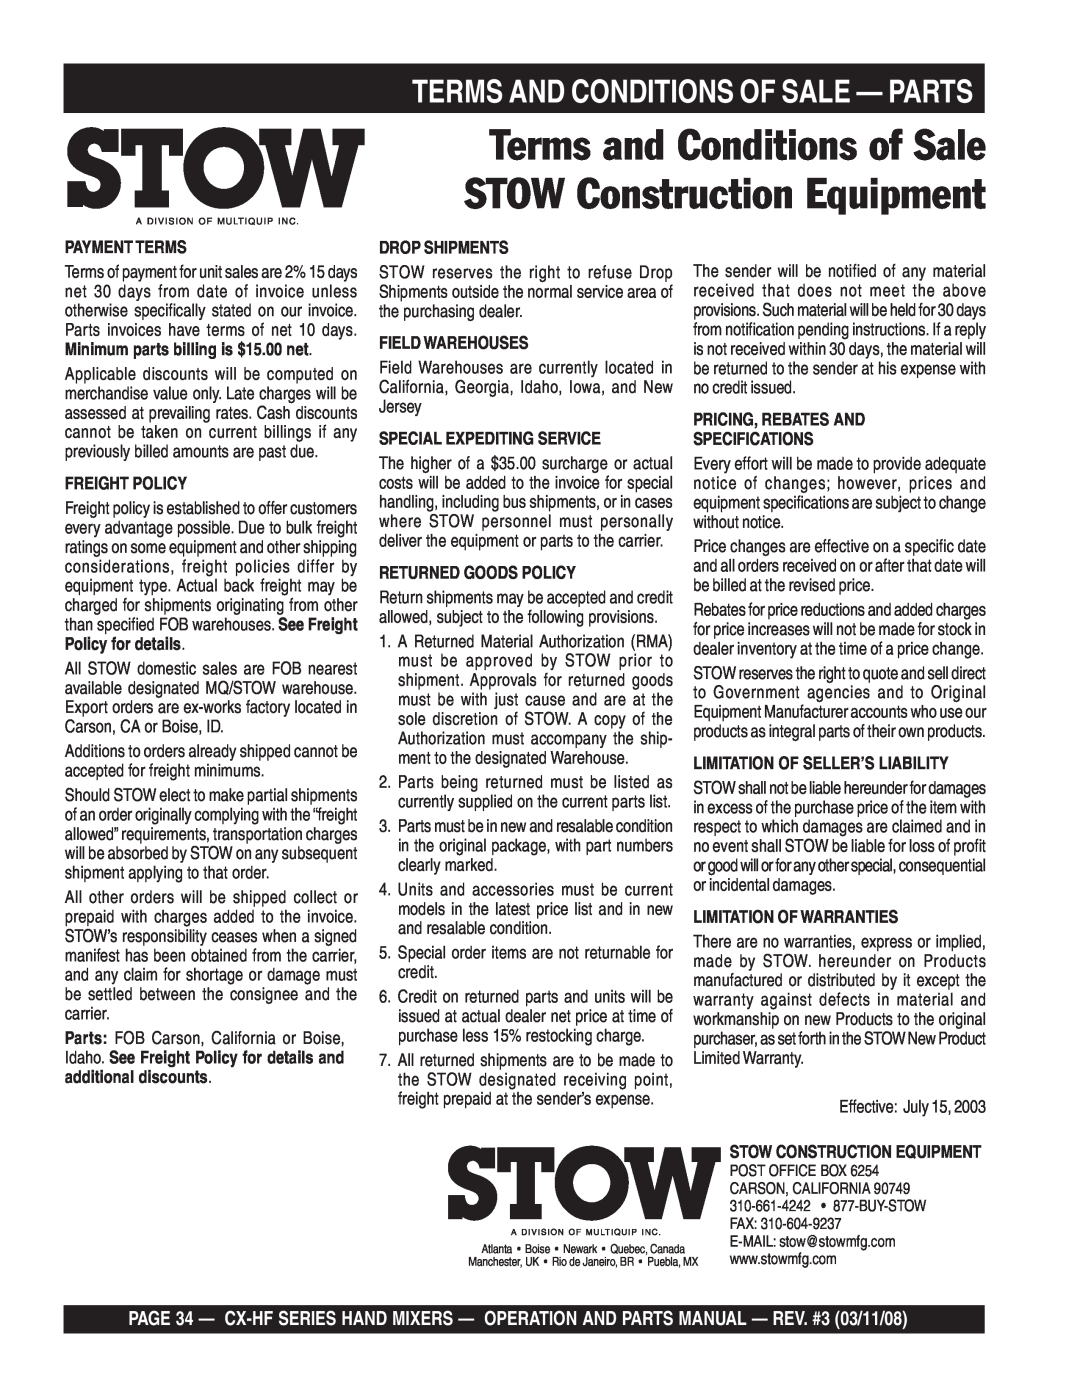 Multiquip CX400HFE, CX600HF Terms And Conditions Of Sale - Parts, Terms and Conditions of Sale STOW Construction Equipment 